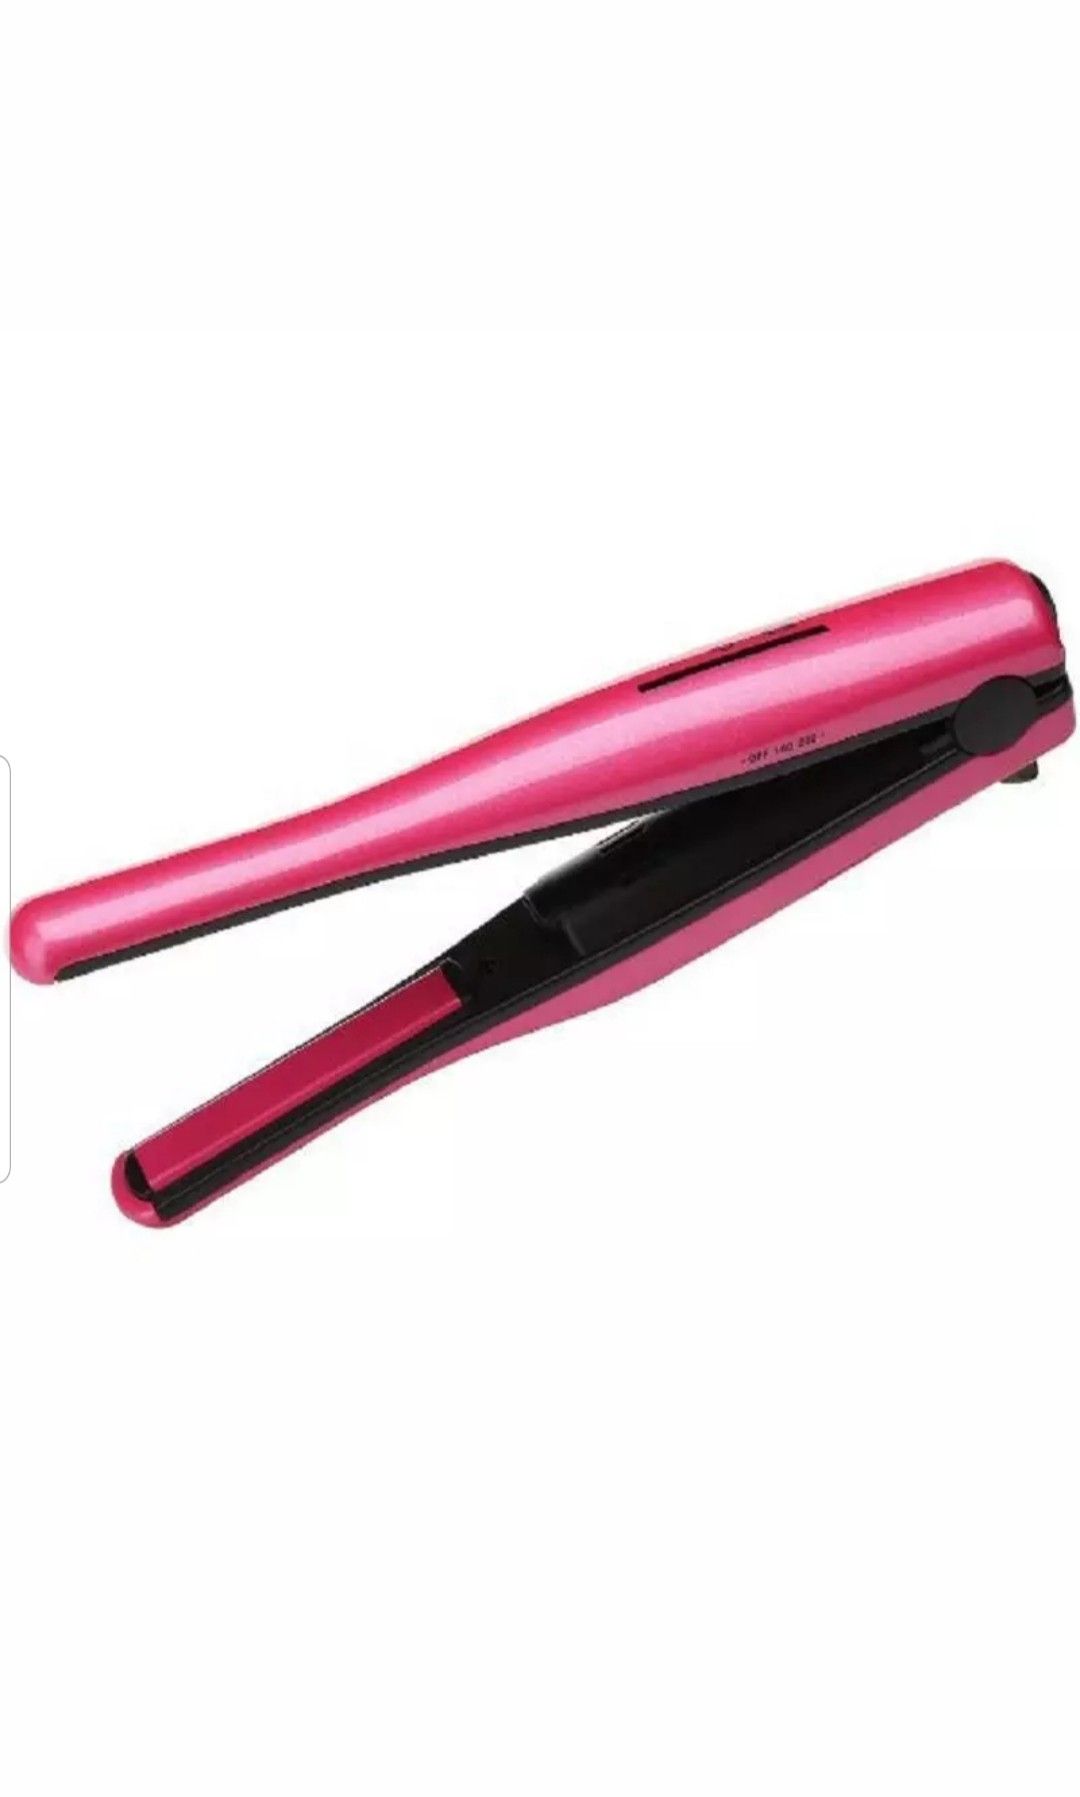 Travel Rechargeable Cordless USB Ceramic Hair Straightener Curling Iron Tool